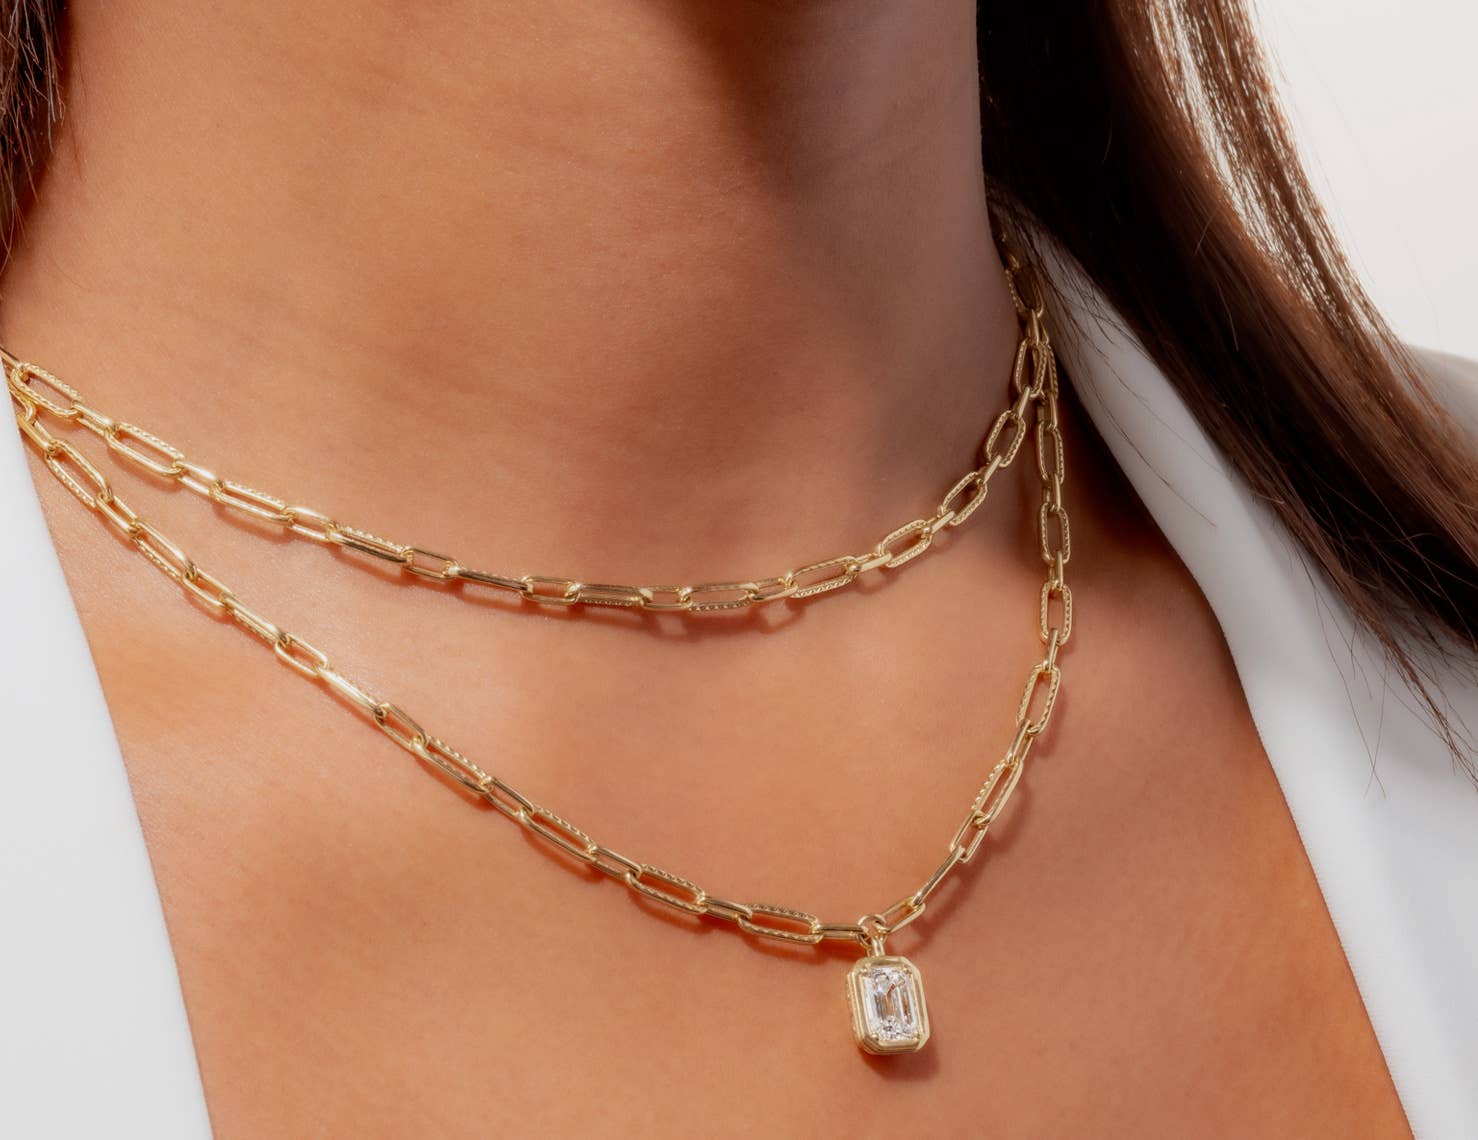 Close-up of Model posing in TACORI Jewelry Necklace